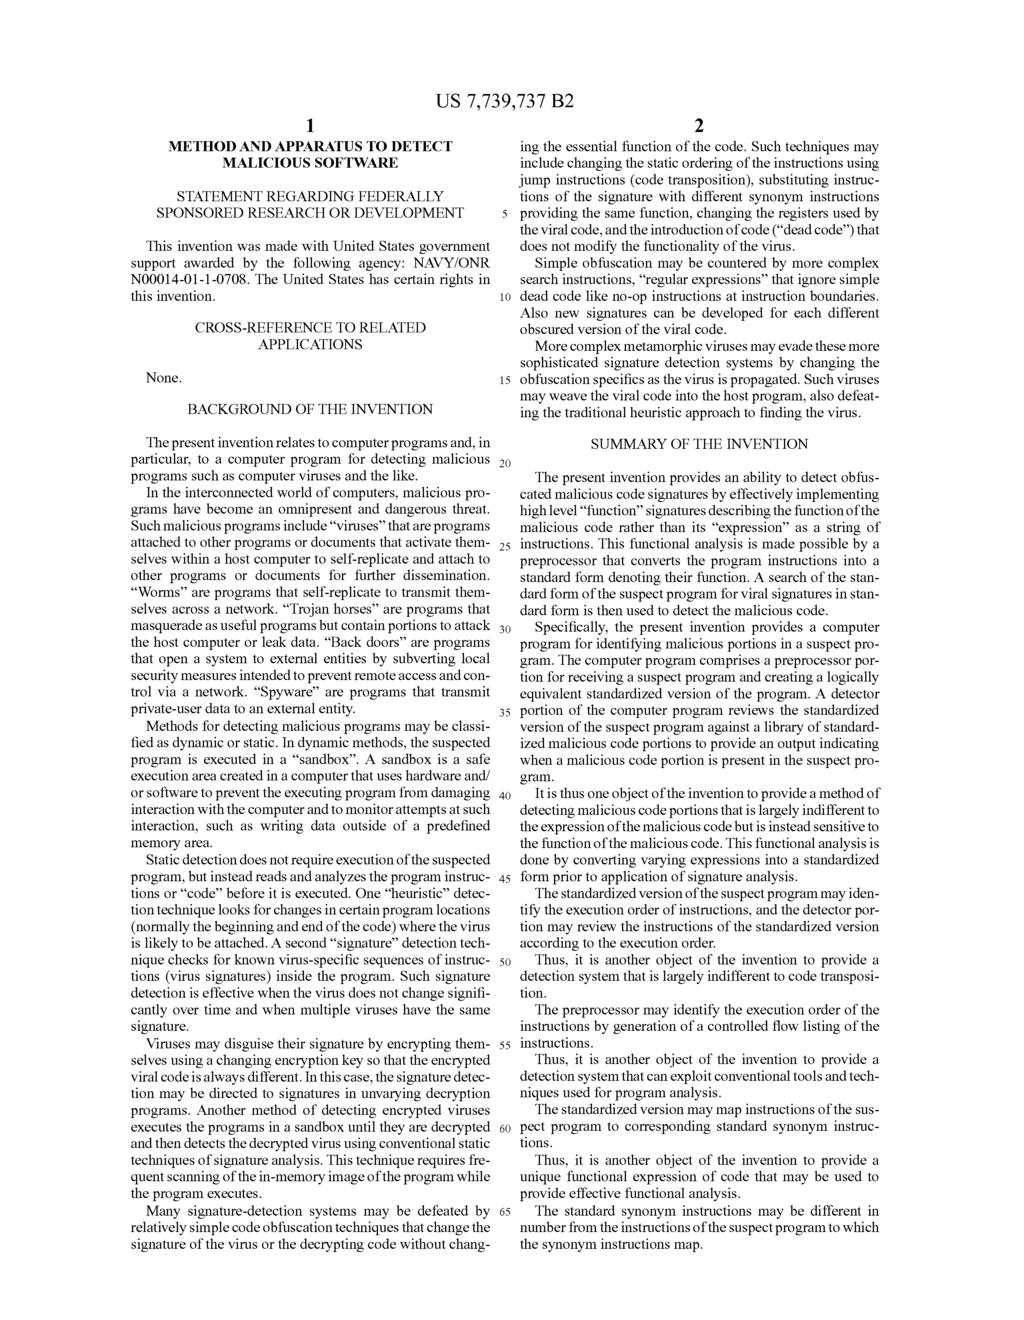 1 METHOD AND APPARATUS TO DETECT MALICIOUS SOFTWARE STATEMENT REGARDING FEDERALLY SPONSORED RESEARCH OR DEVELOPMENT This invention was made with United States government support awarded by the